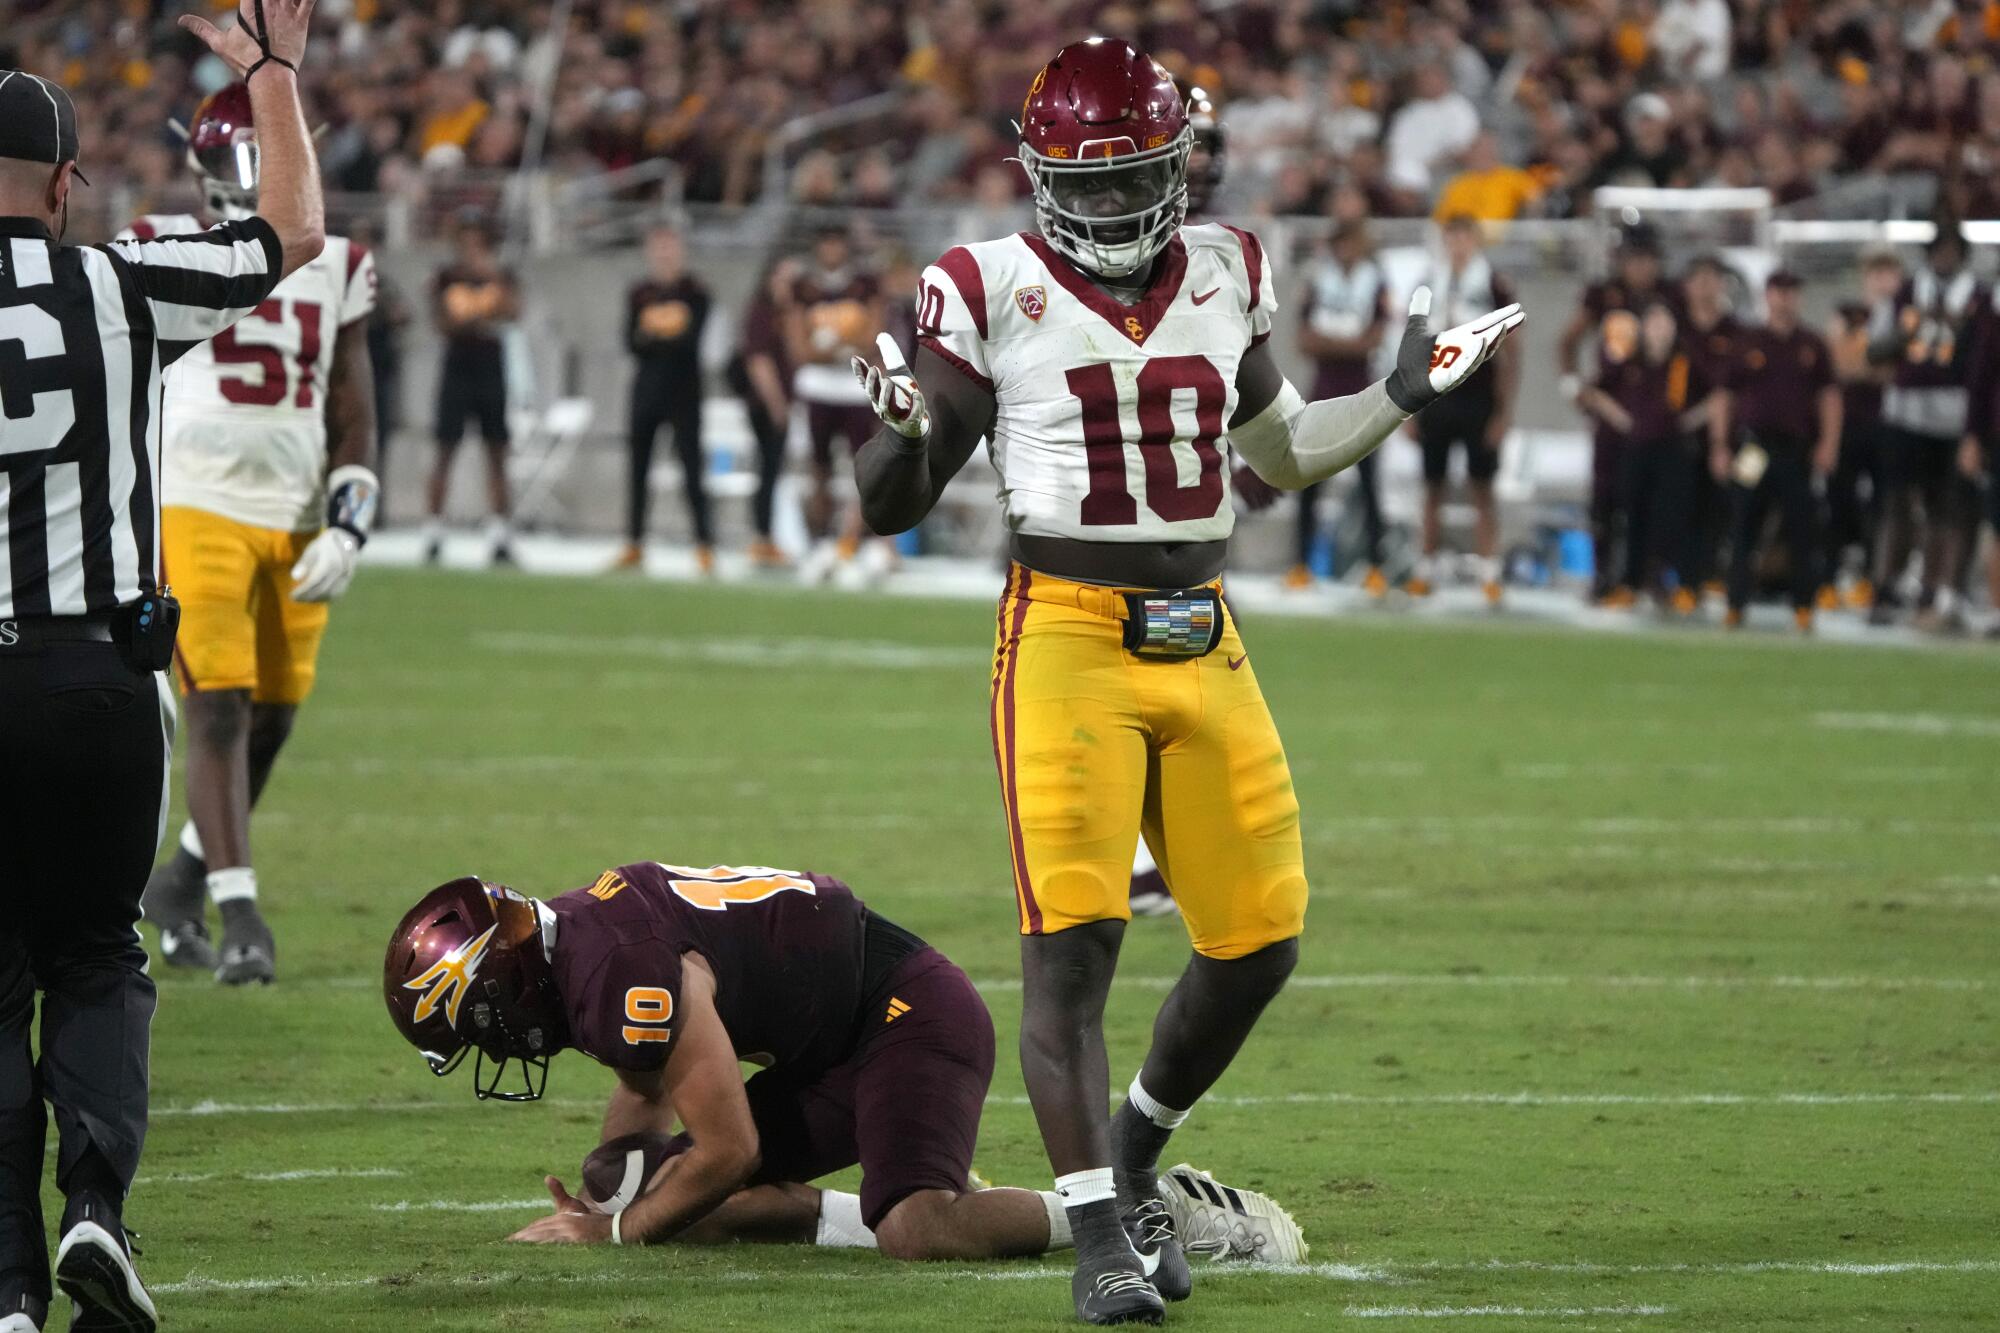 Jamil Muhammad (10) reacts after sacking Arizona State quarterback Drew Pyne in the Trojans' win on Sept. 23.